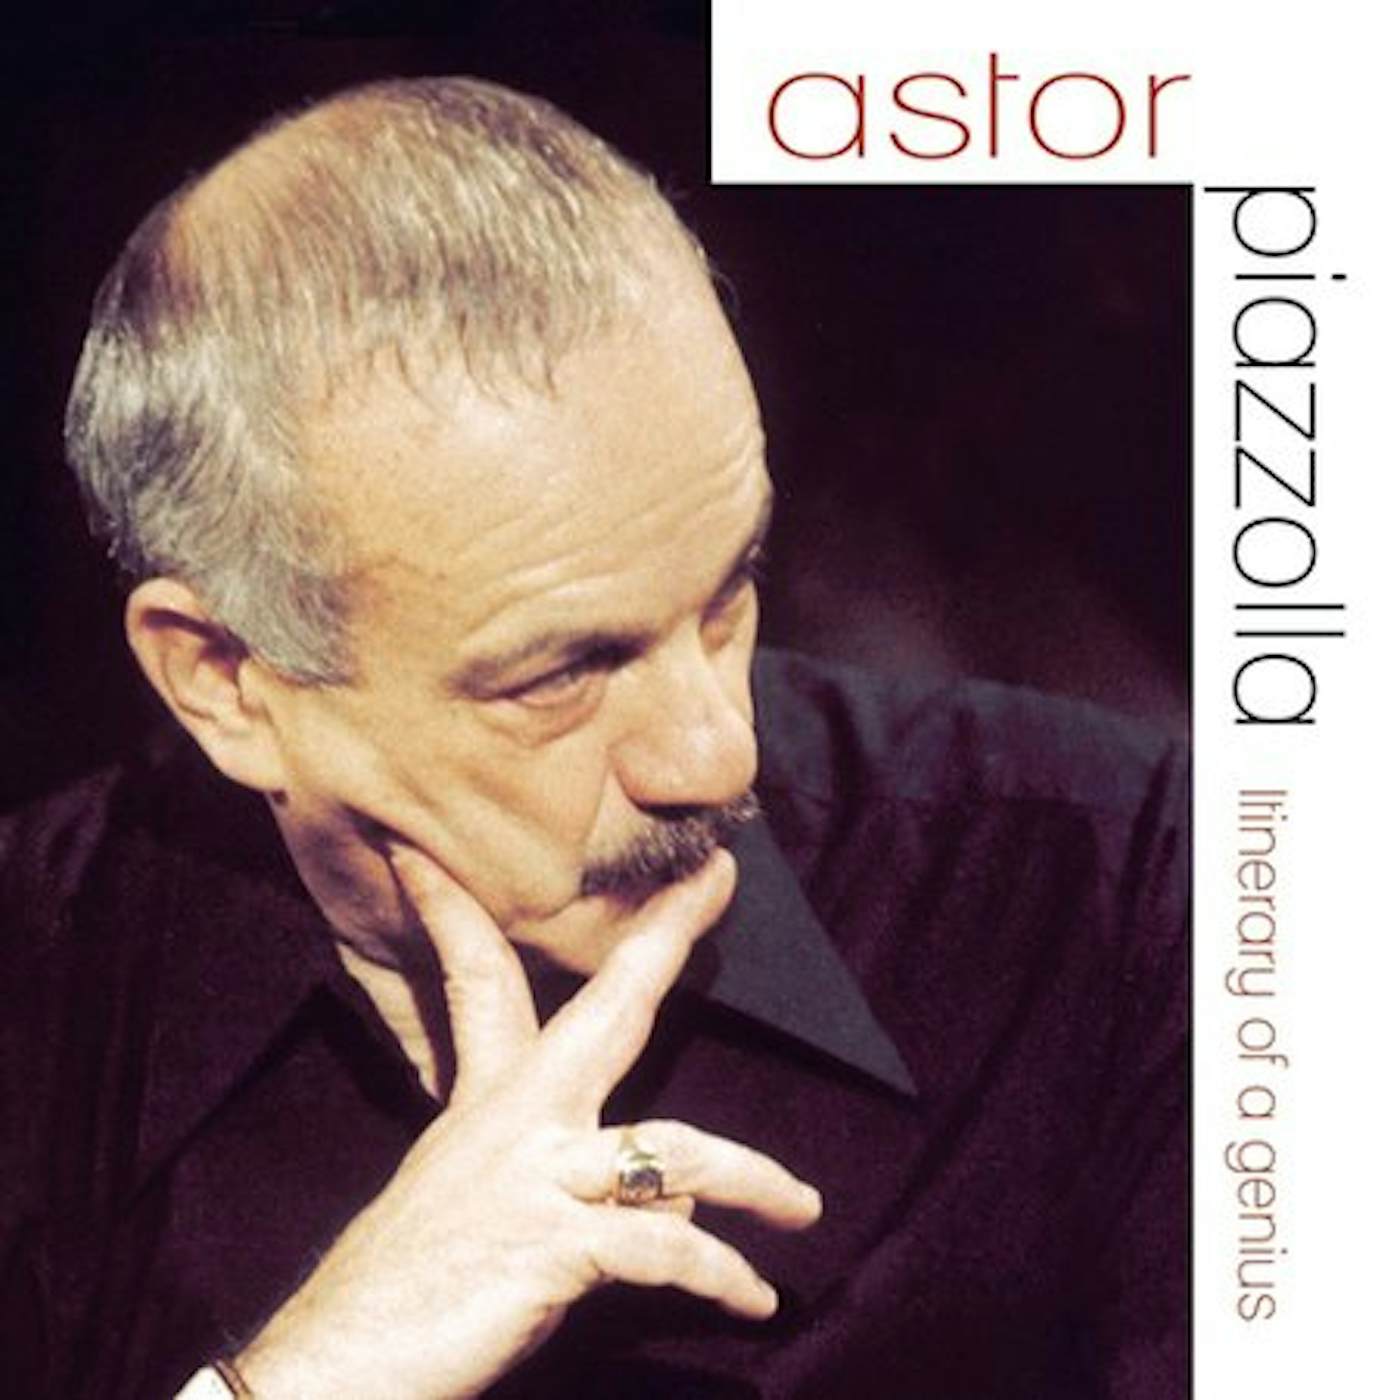 Astor Piazzolla ITINERARY OF A GENIUS CD